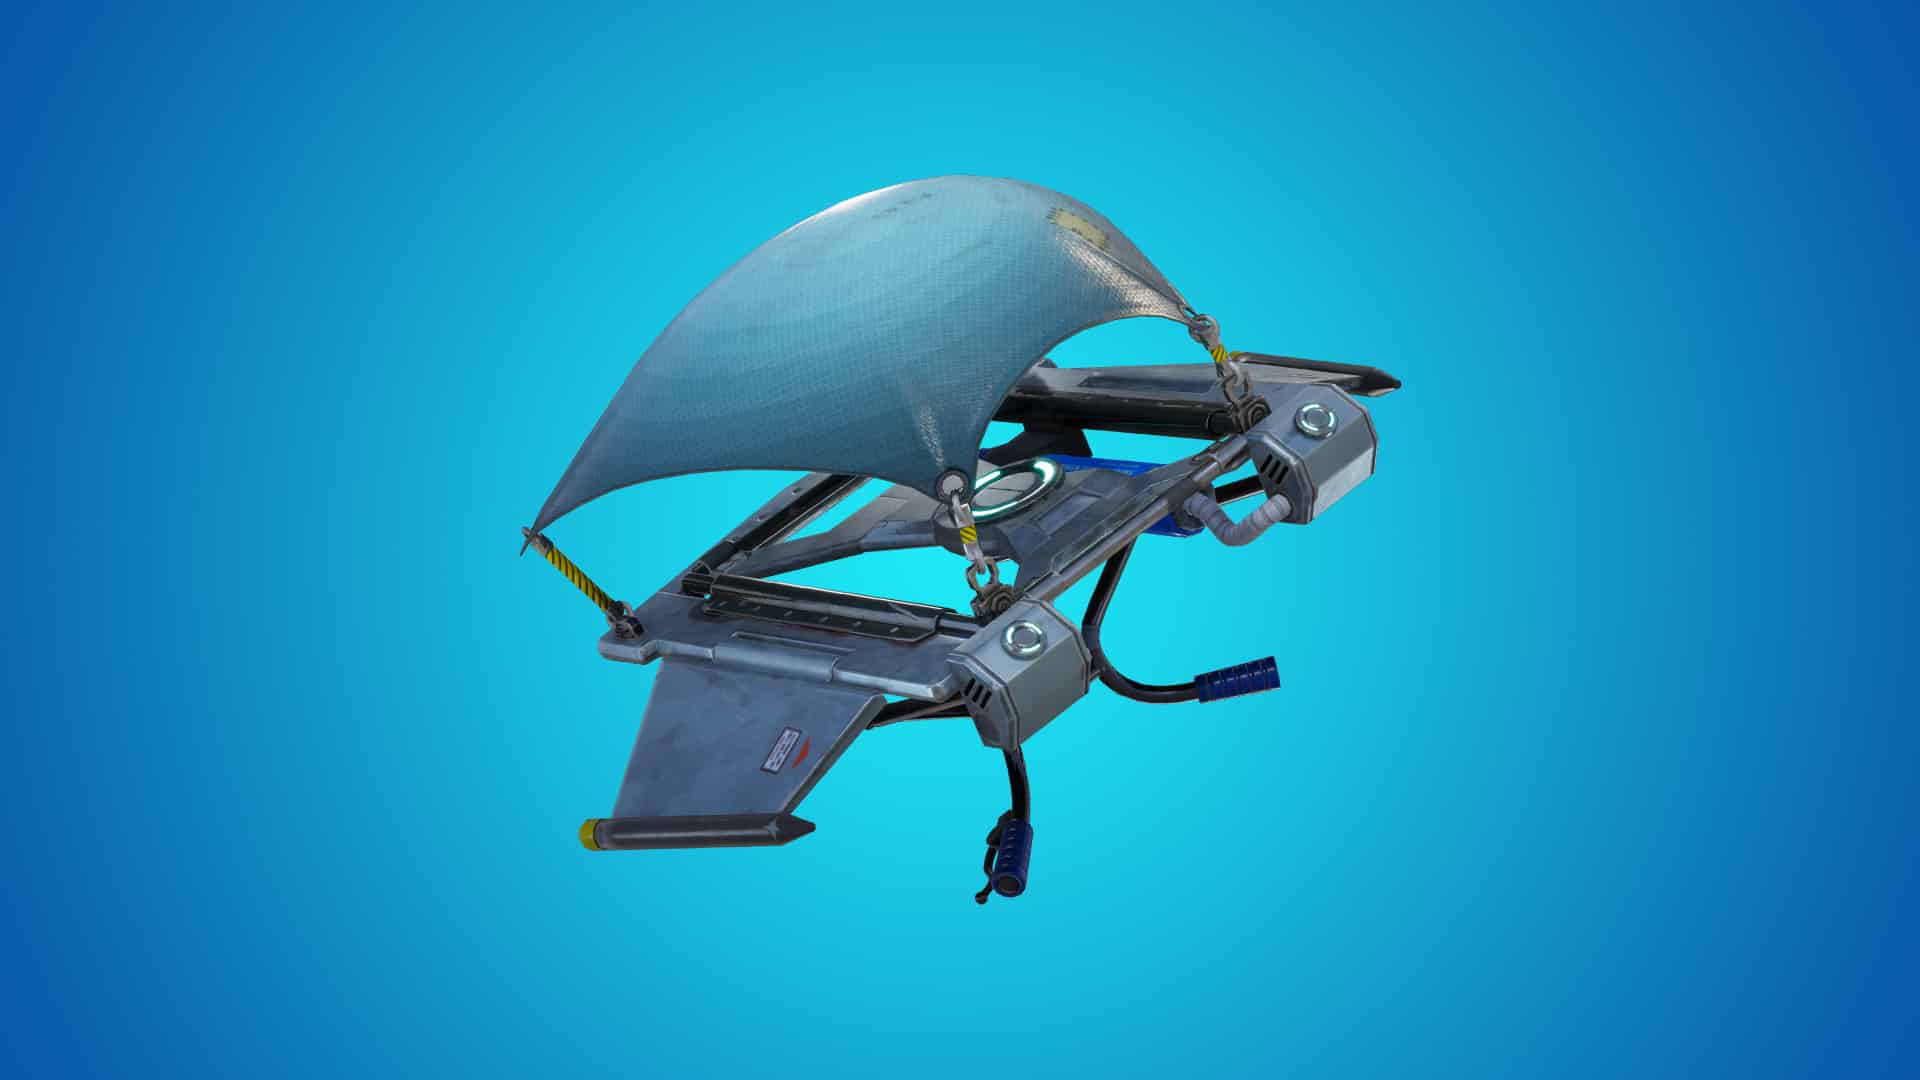 Fortnite blog itemized glider redeploy BR07 News Featured GliderRedeploy 1920x1080 349437daca4e1e01d0d6ee1e5183ae633275d781